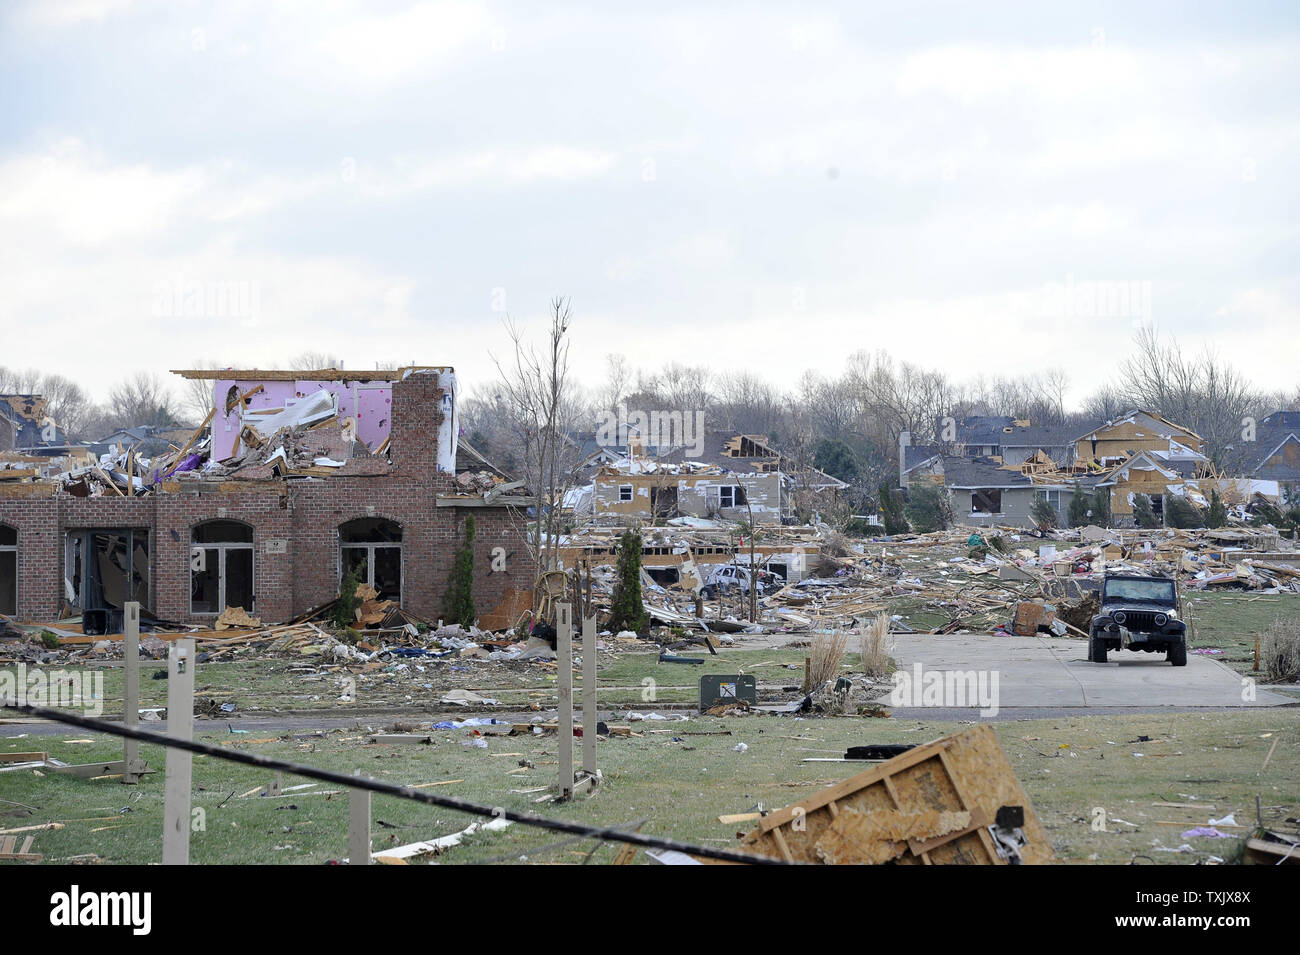 The remnants of houses stands in Washington, Illinois on November 18, 2013. Six people died and hundreds of homes were destroyed in Illinois as 81 tornadoes were sighted on November 17 throughout 12 midwest states including the EF4 tornado that struck Washington, Illinois.     UPI/Brian Kersey Stock Photo